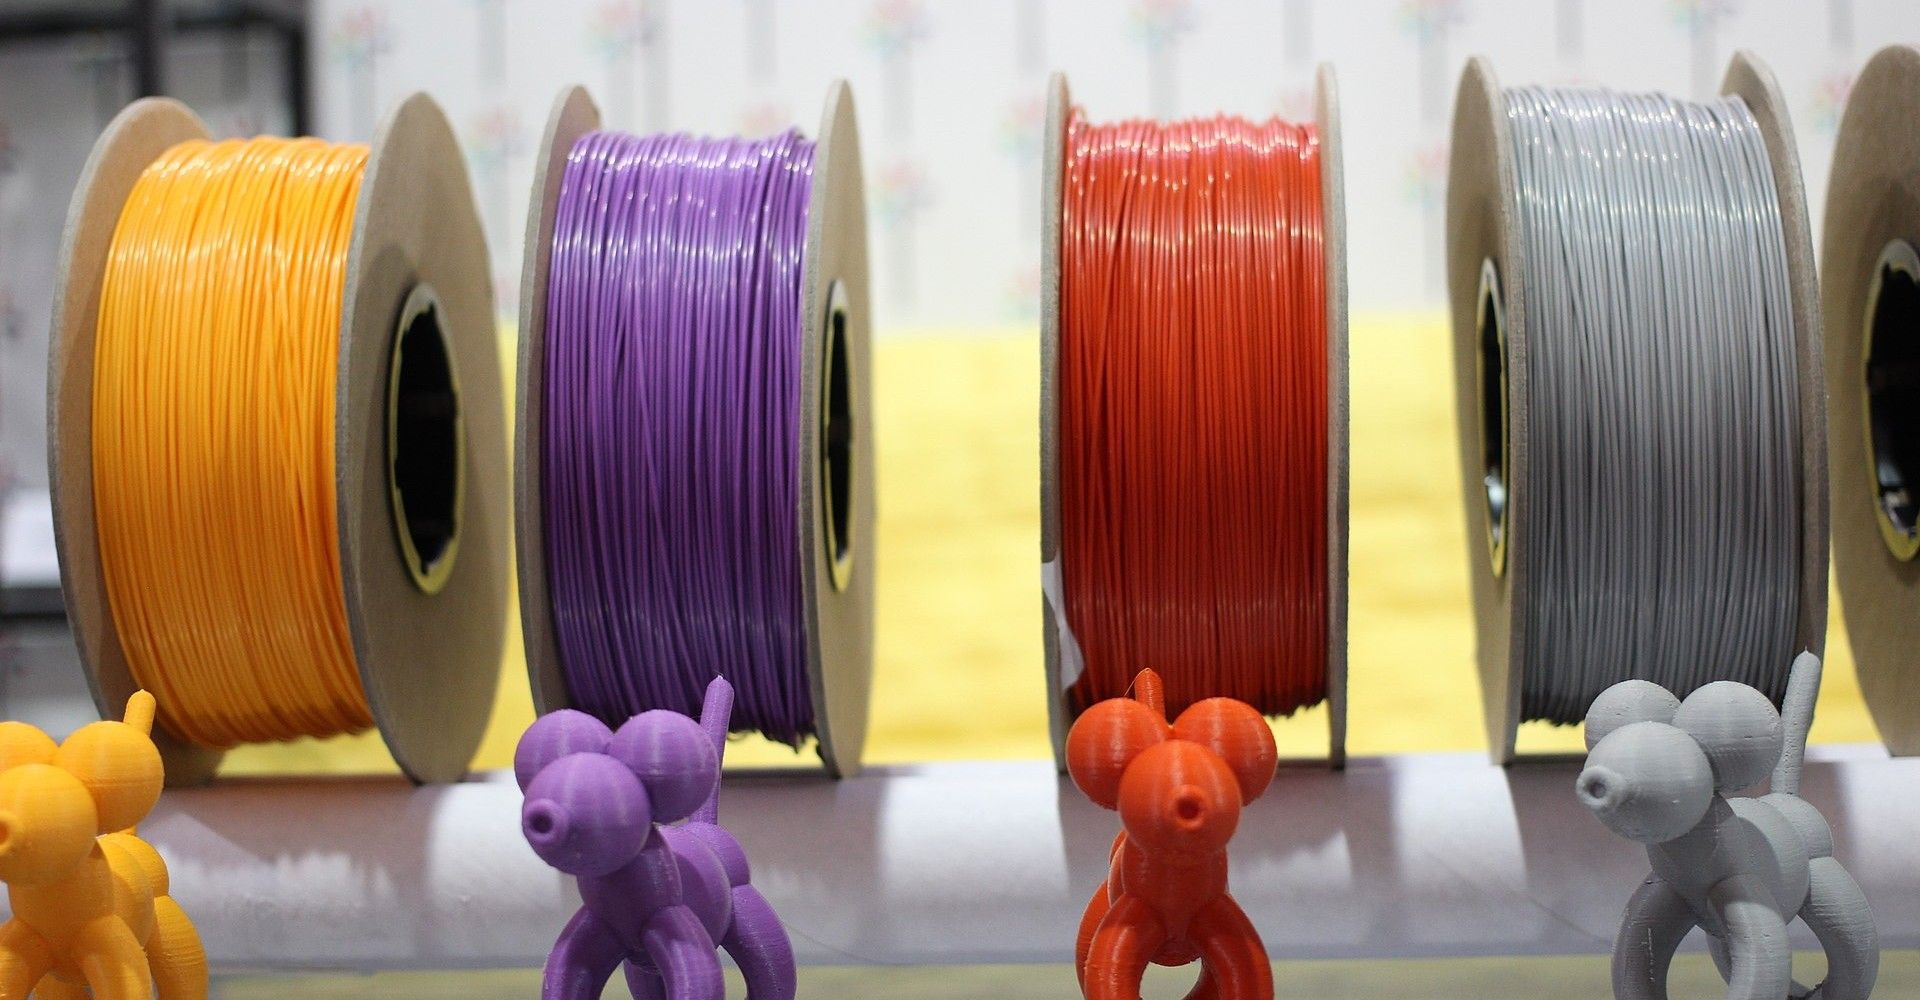 Four spools of 3D printing filament material in yellow, purple, orange and gray